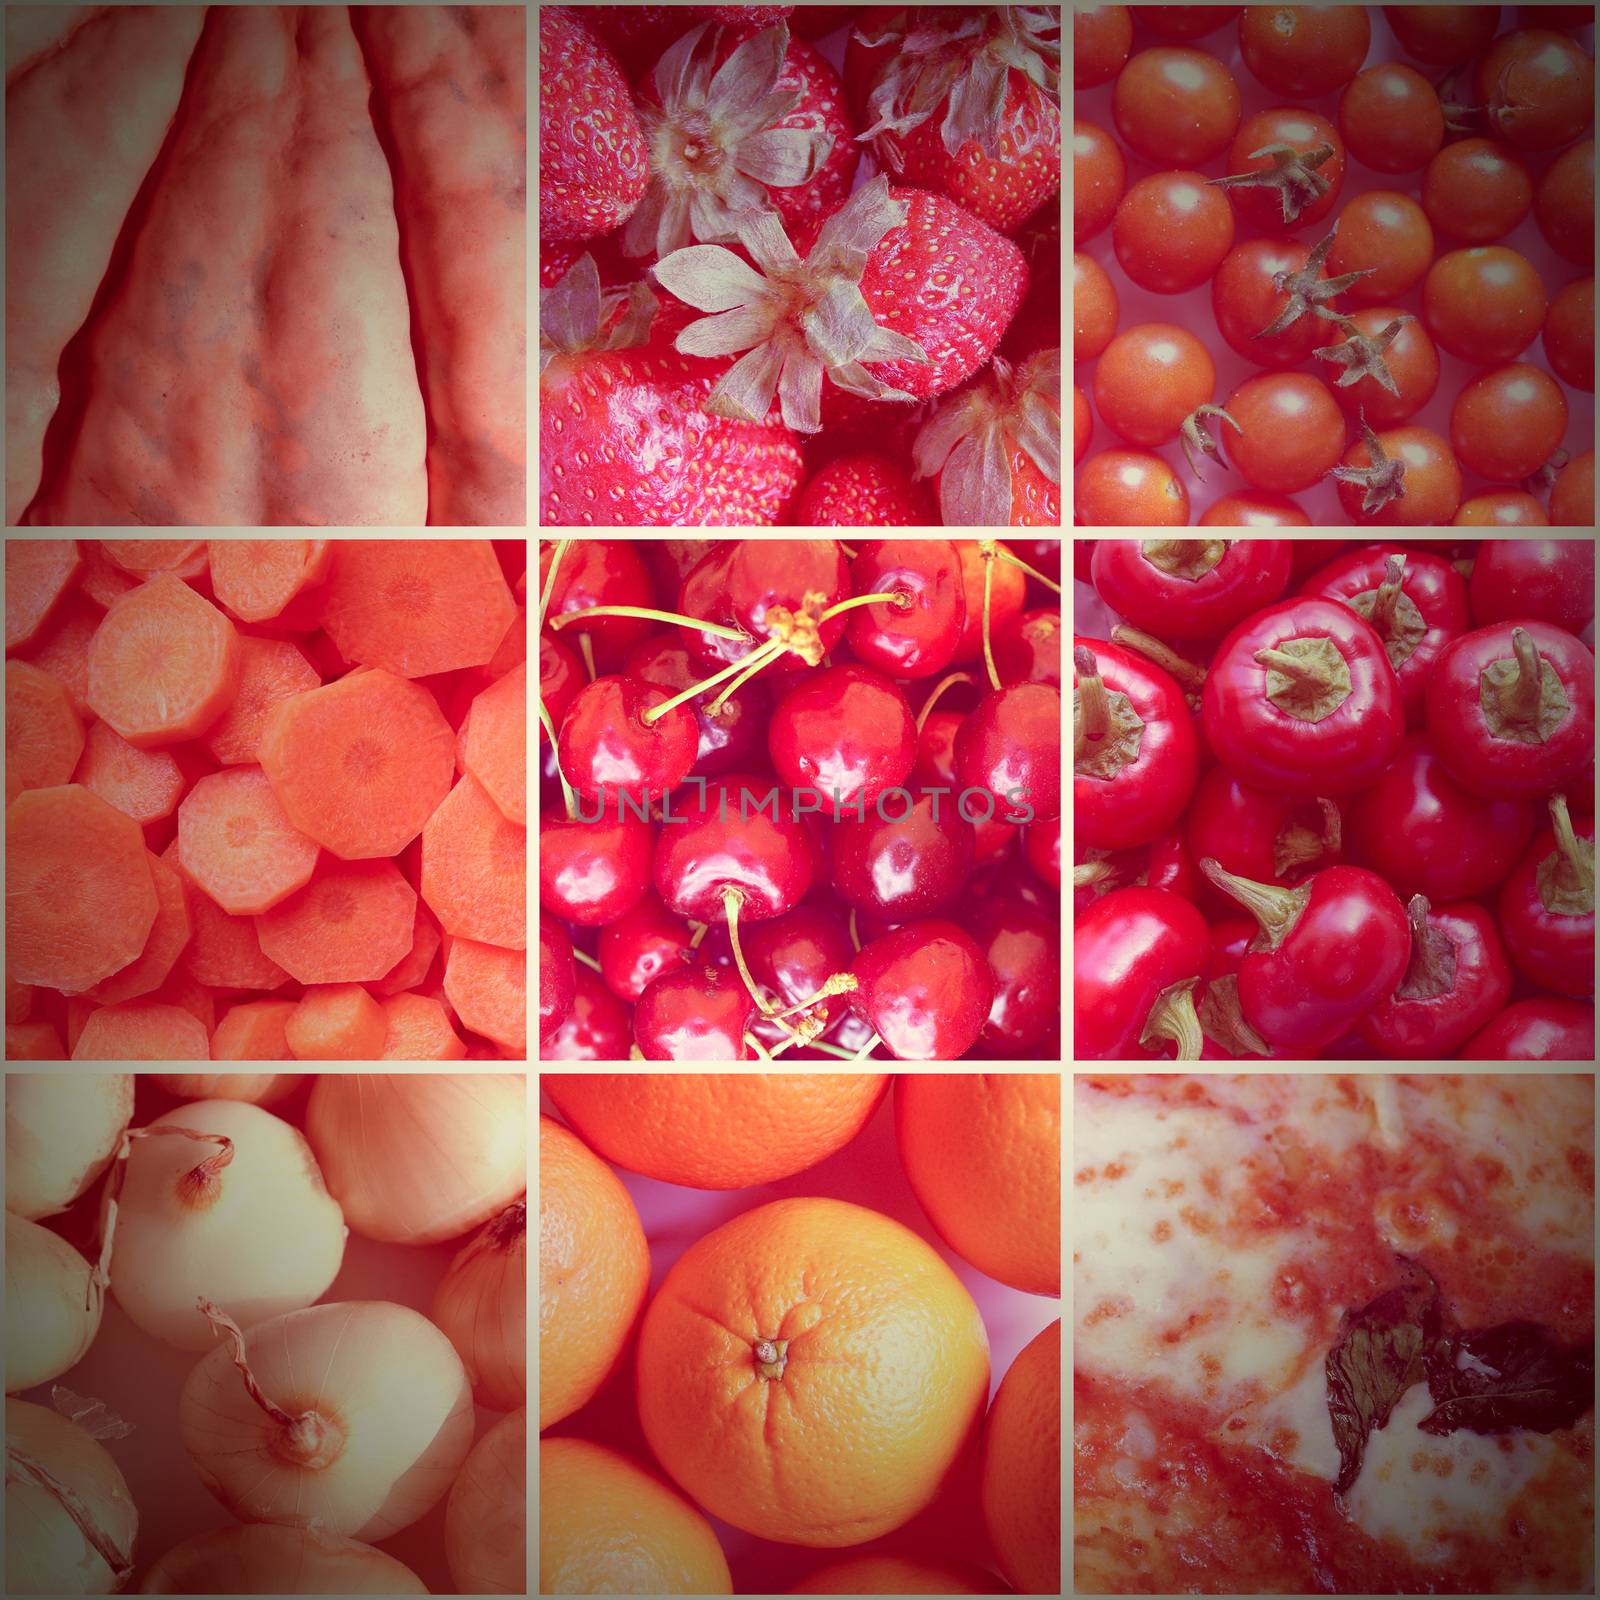 Retro look Red food collage by claudiodivizia